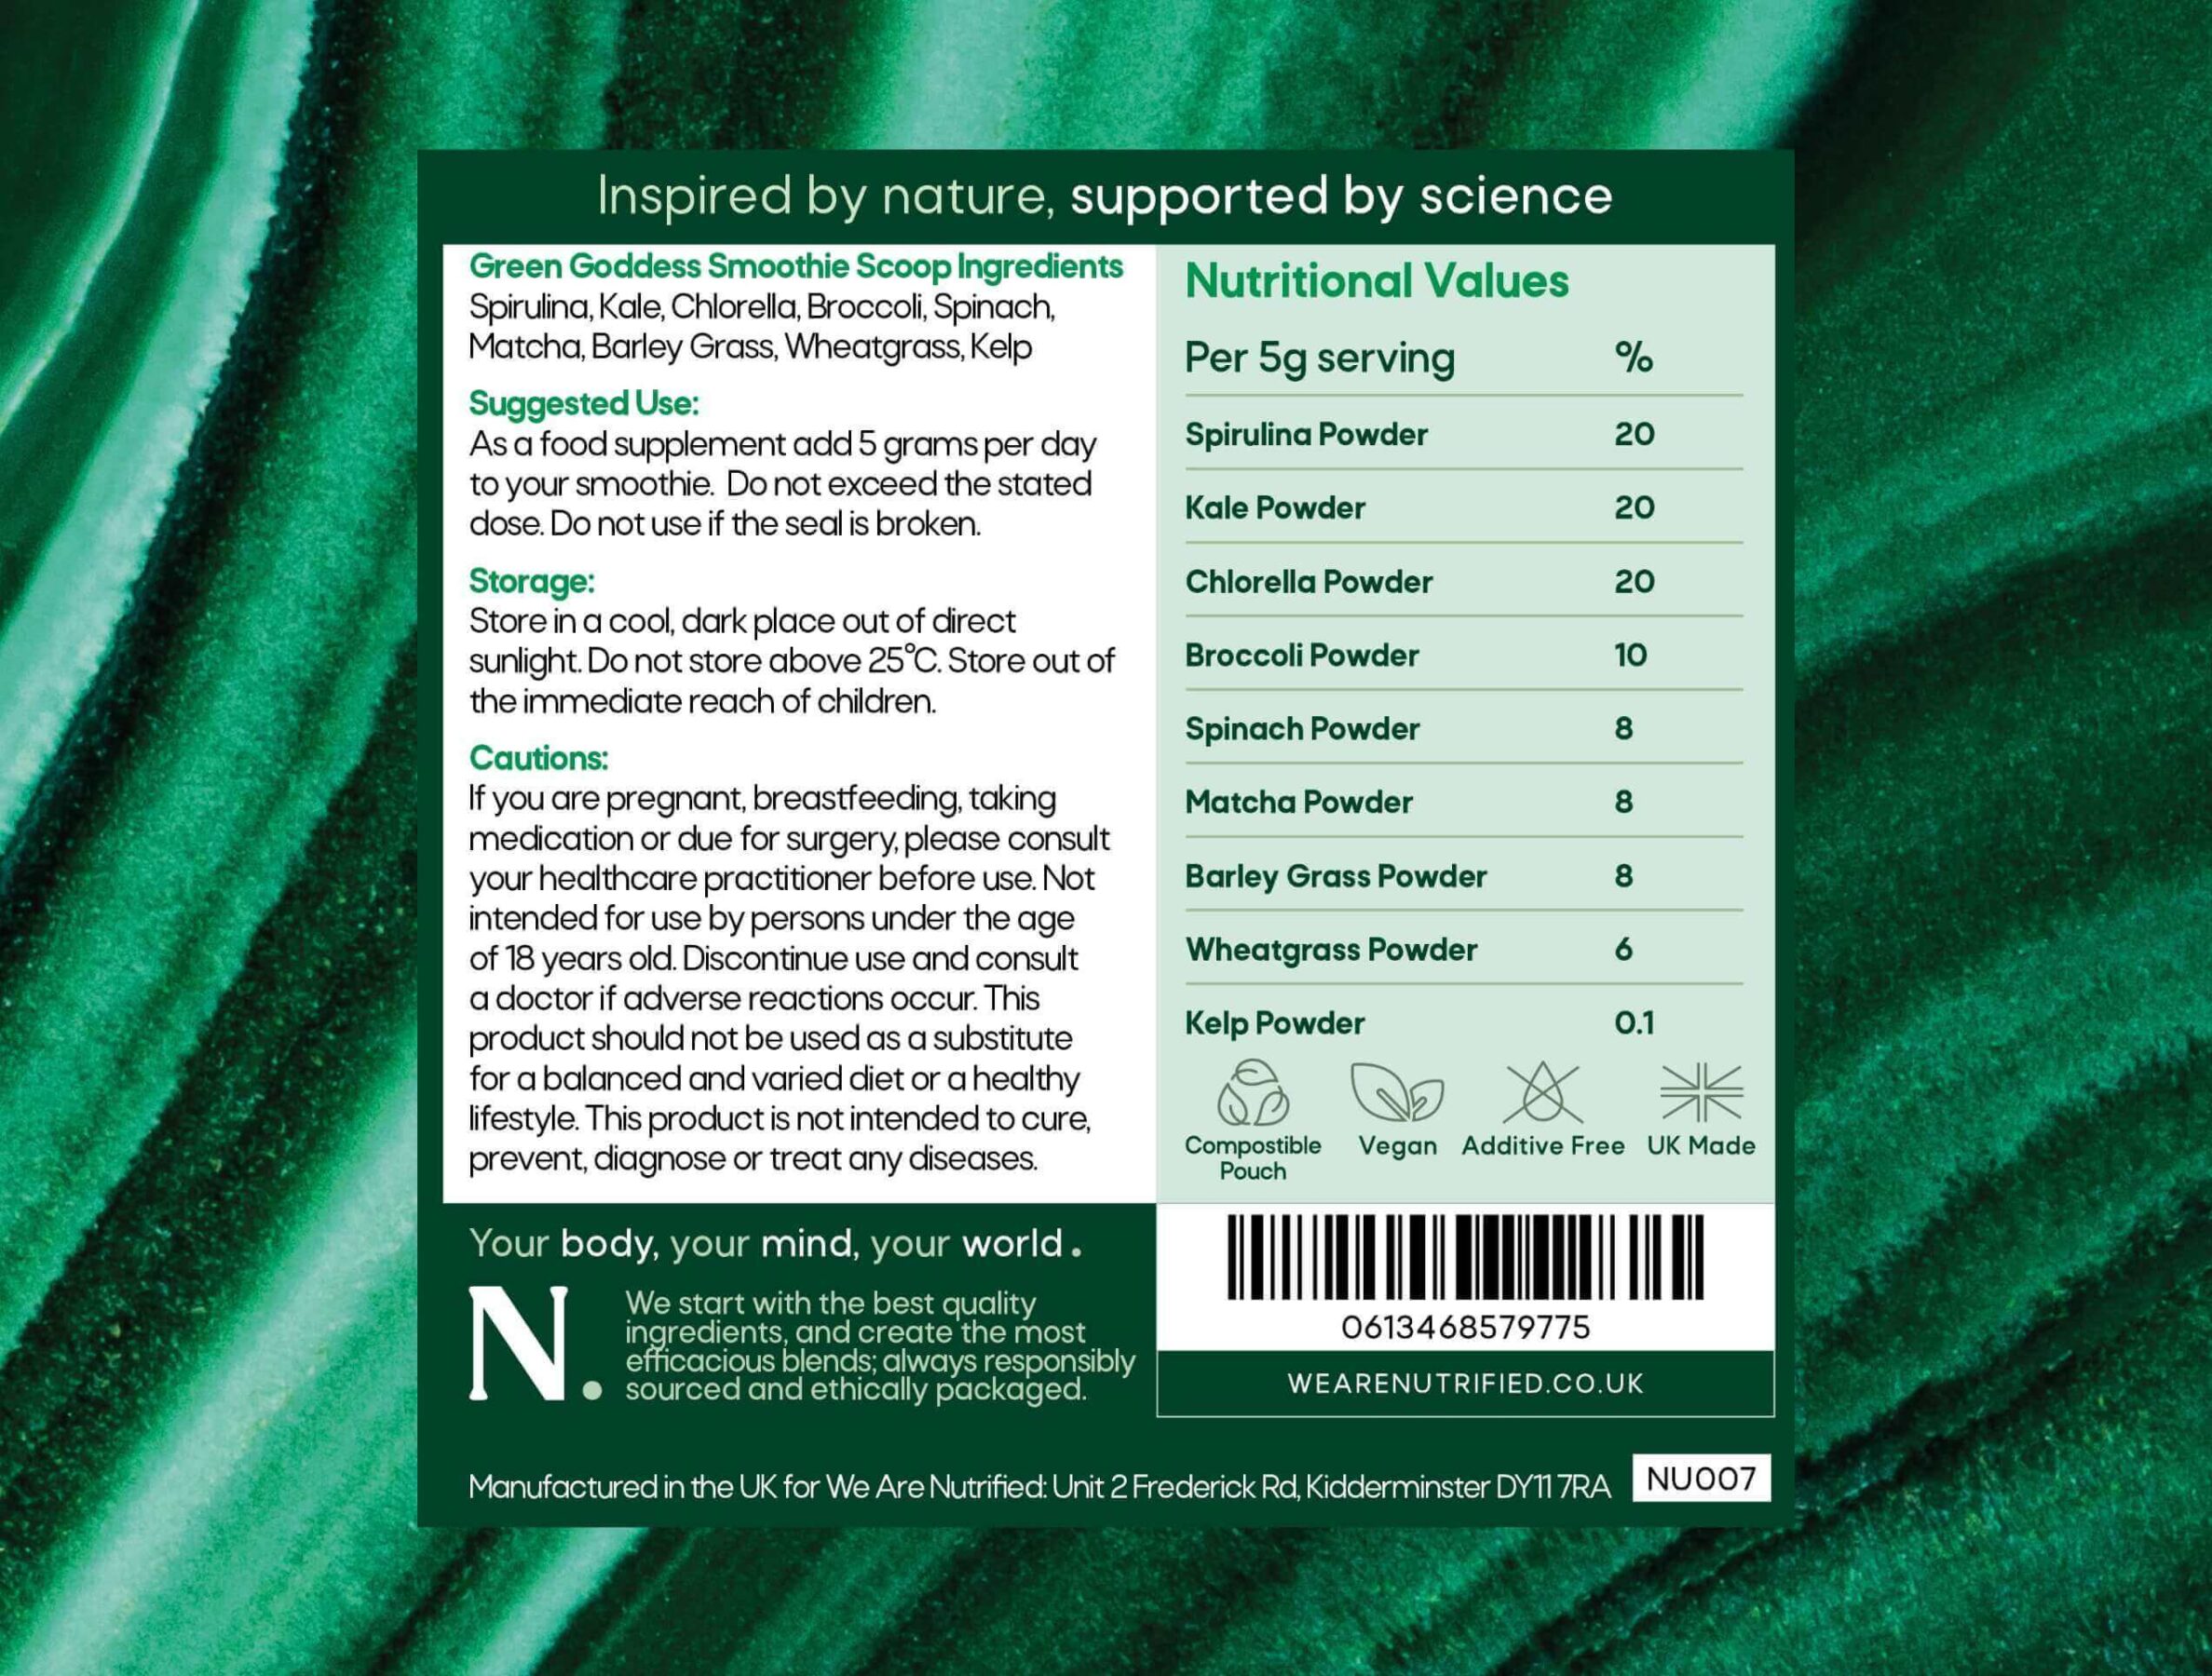 Nutritional Label for Green Goddess Smoothie Scoop Powder